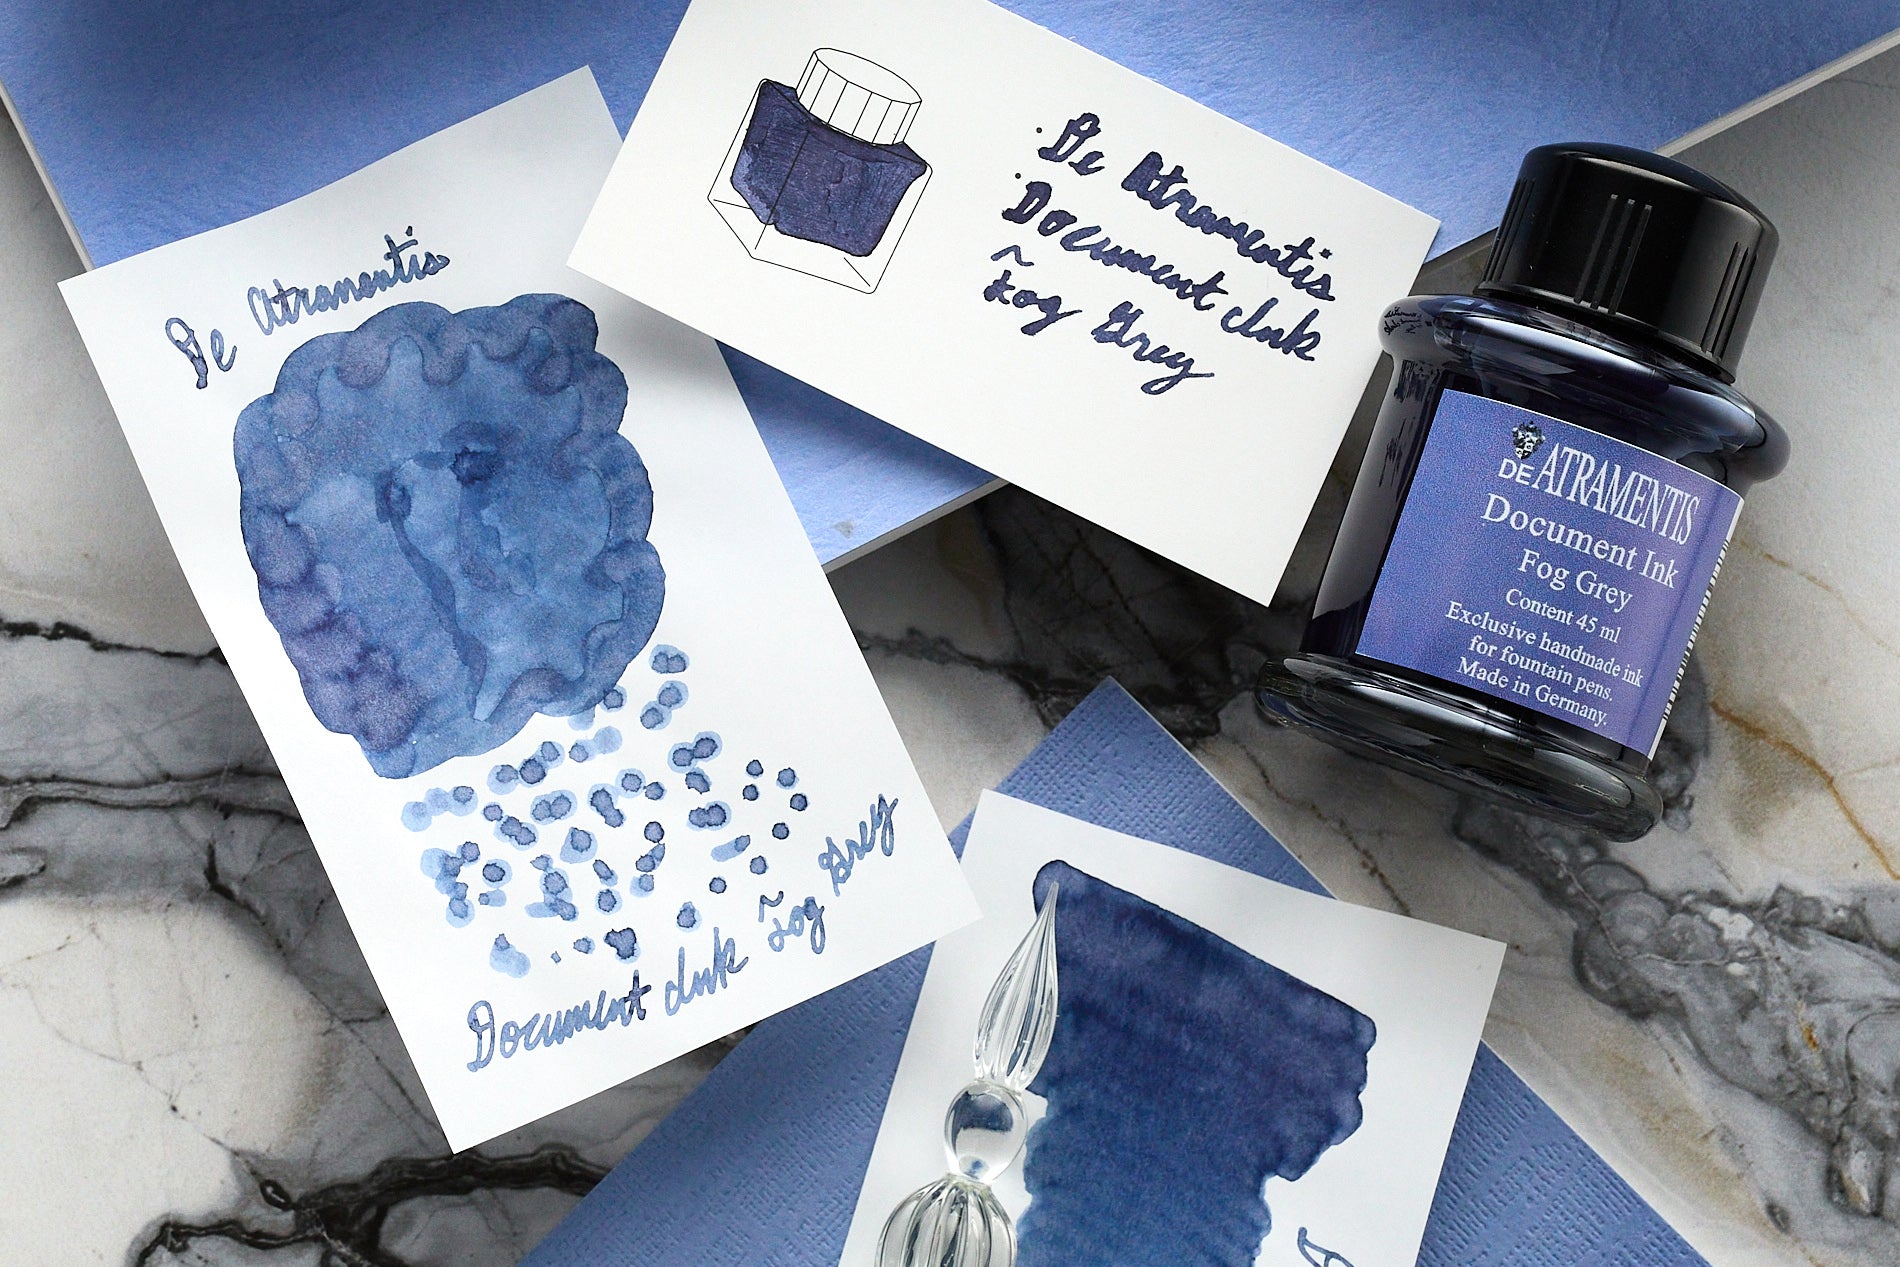 45 mL glass bottle of De Atramentis Document Ink Fog Grey Fountain Pen Ink and 3 white cards with writing and doodles using Document Ink Fog Grey on marble background with blue notebooks.